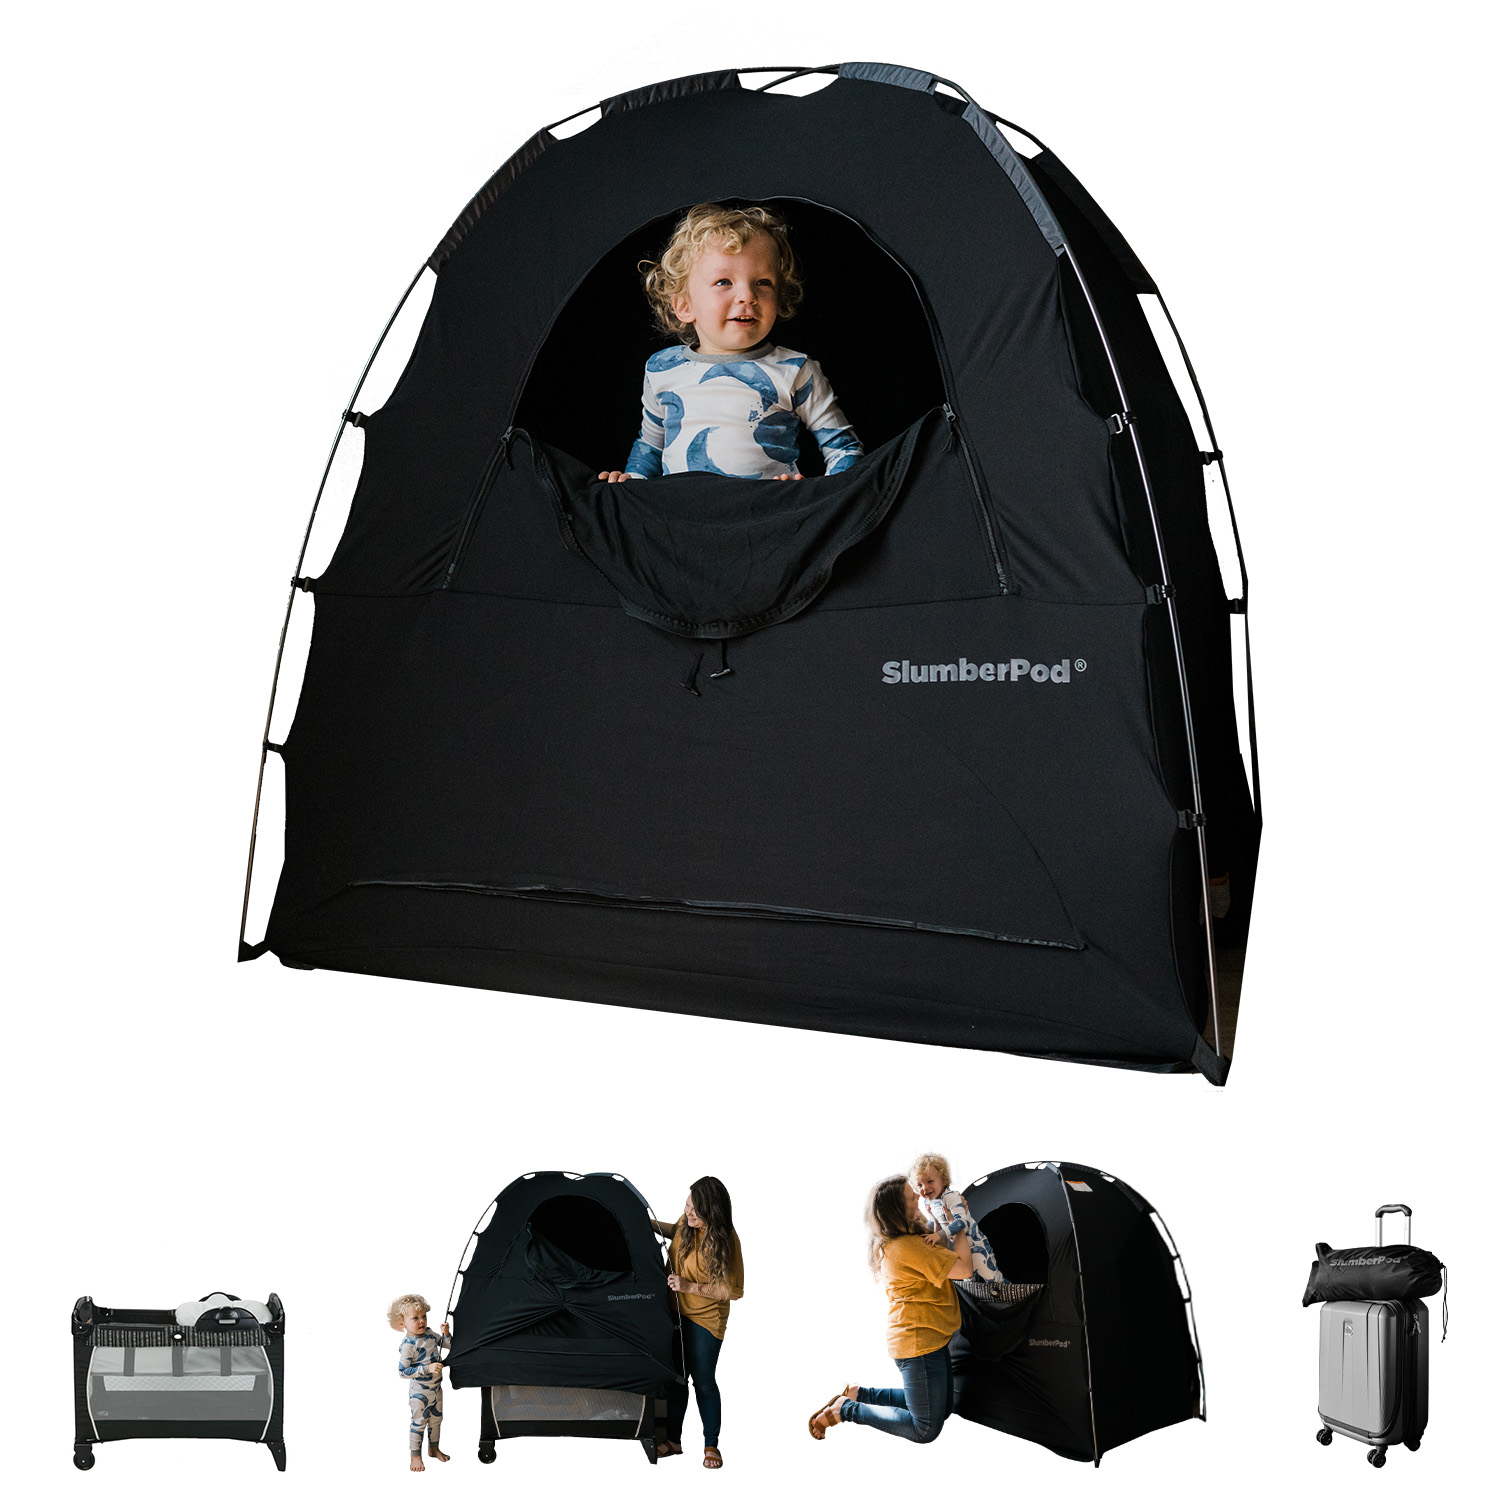 The SlumberPod is the first-ever portable, freestanding blackout sleep pod for babies and toddlers.